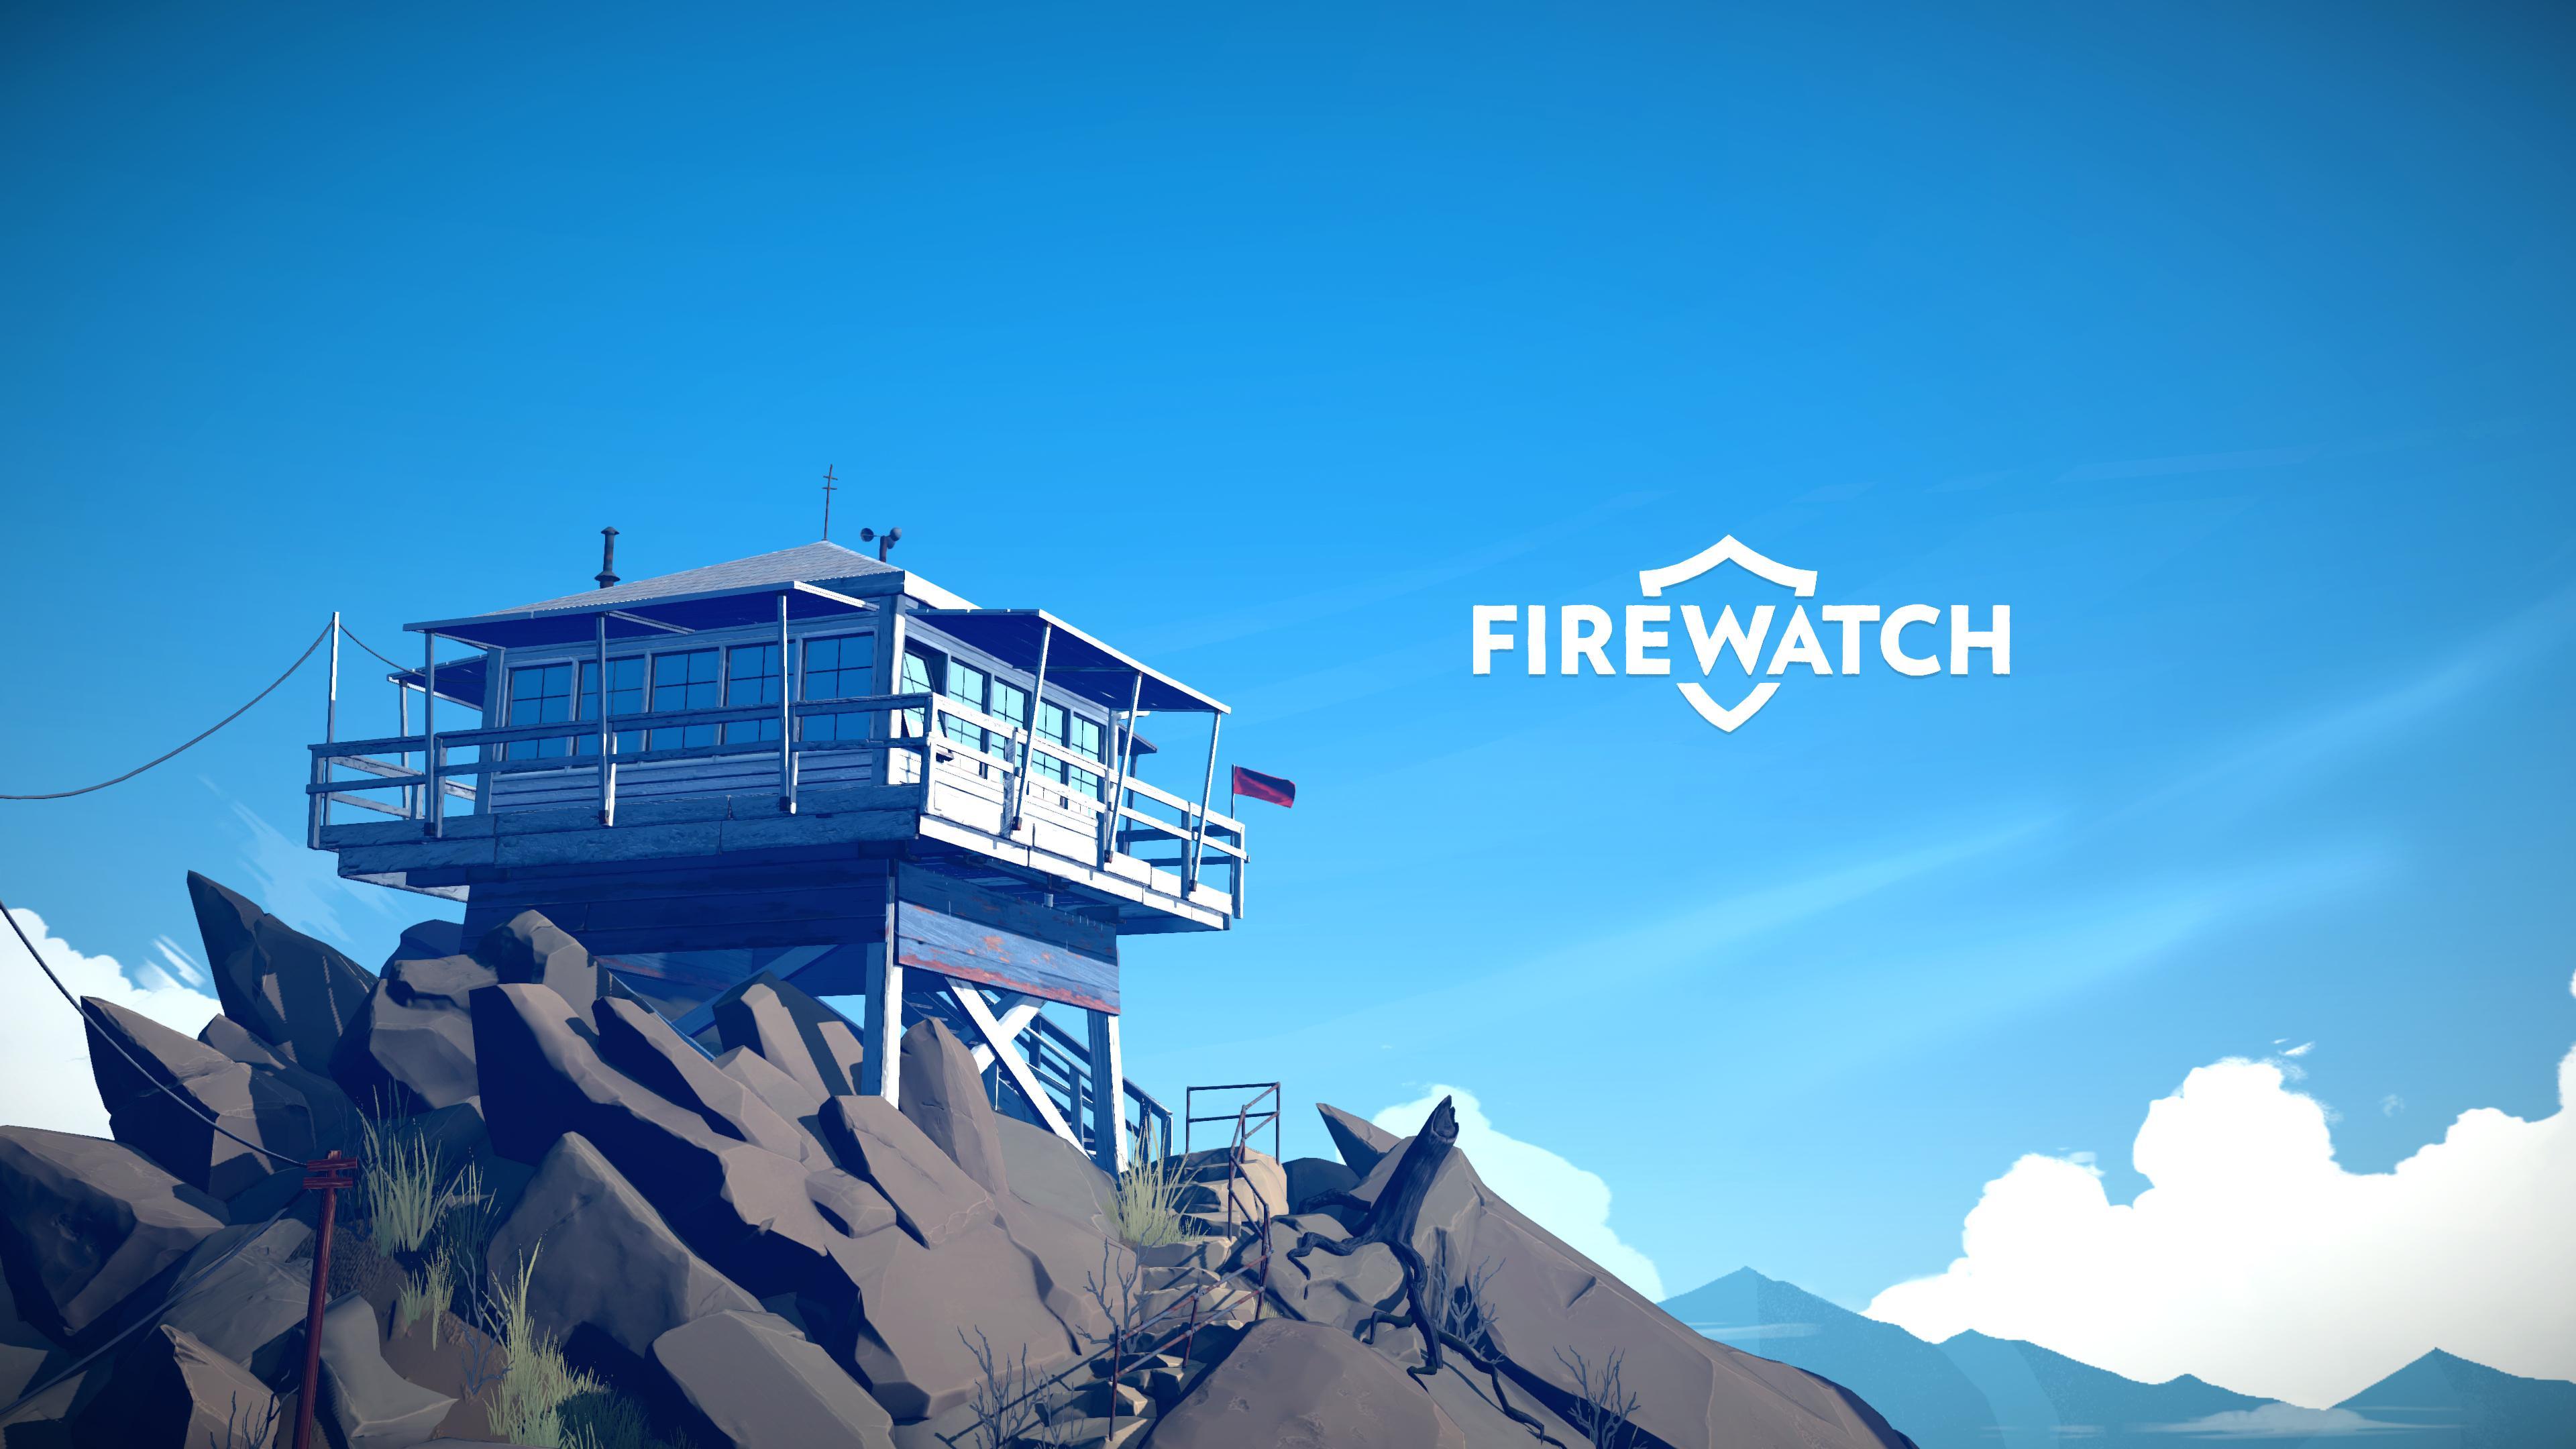 Firewatch's Main Menu was so Aesthetic that I Photohopped it into